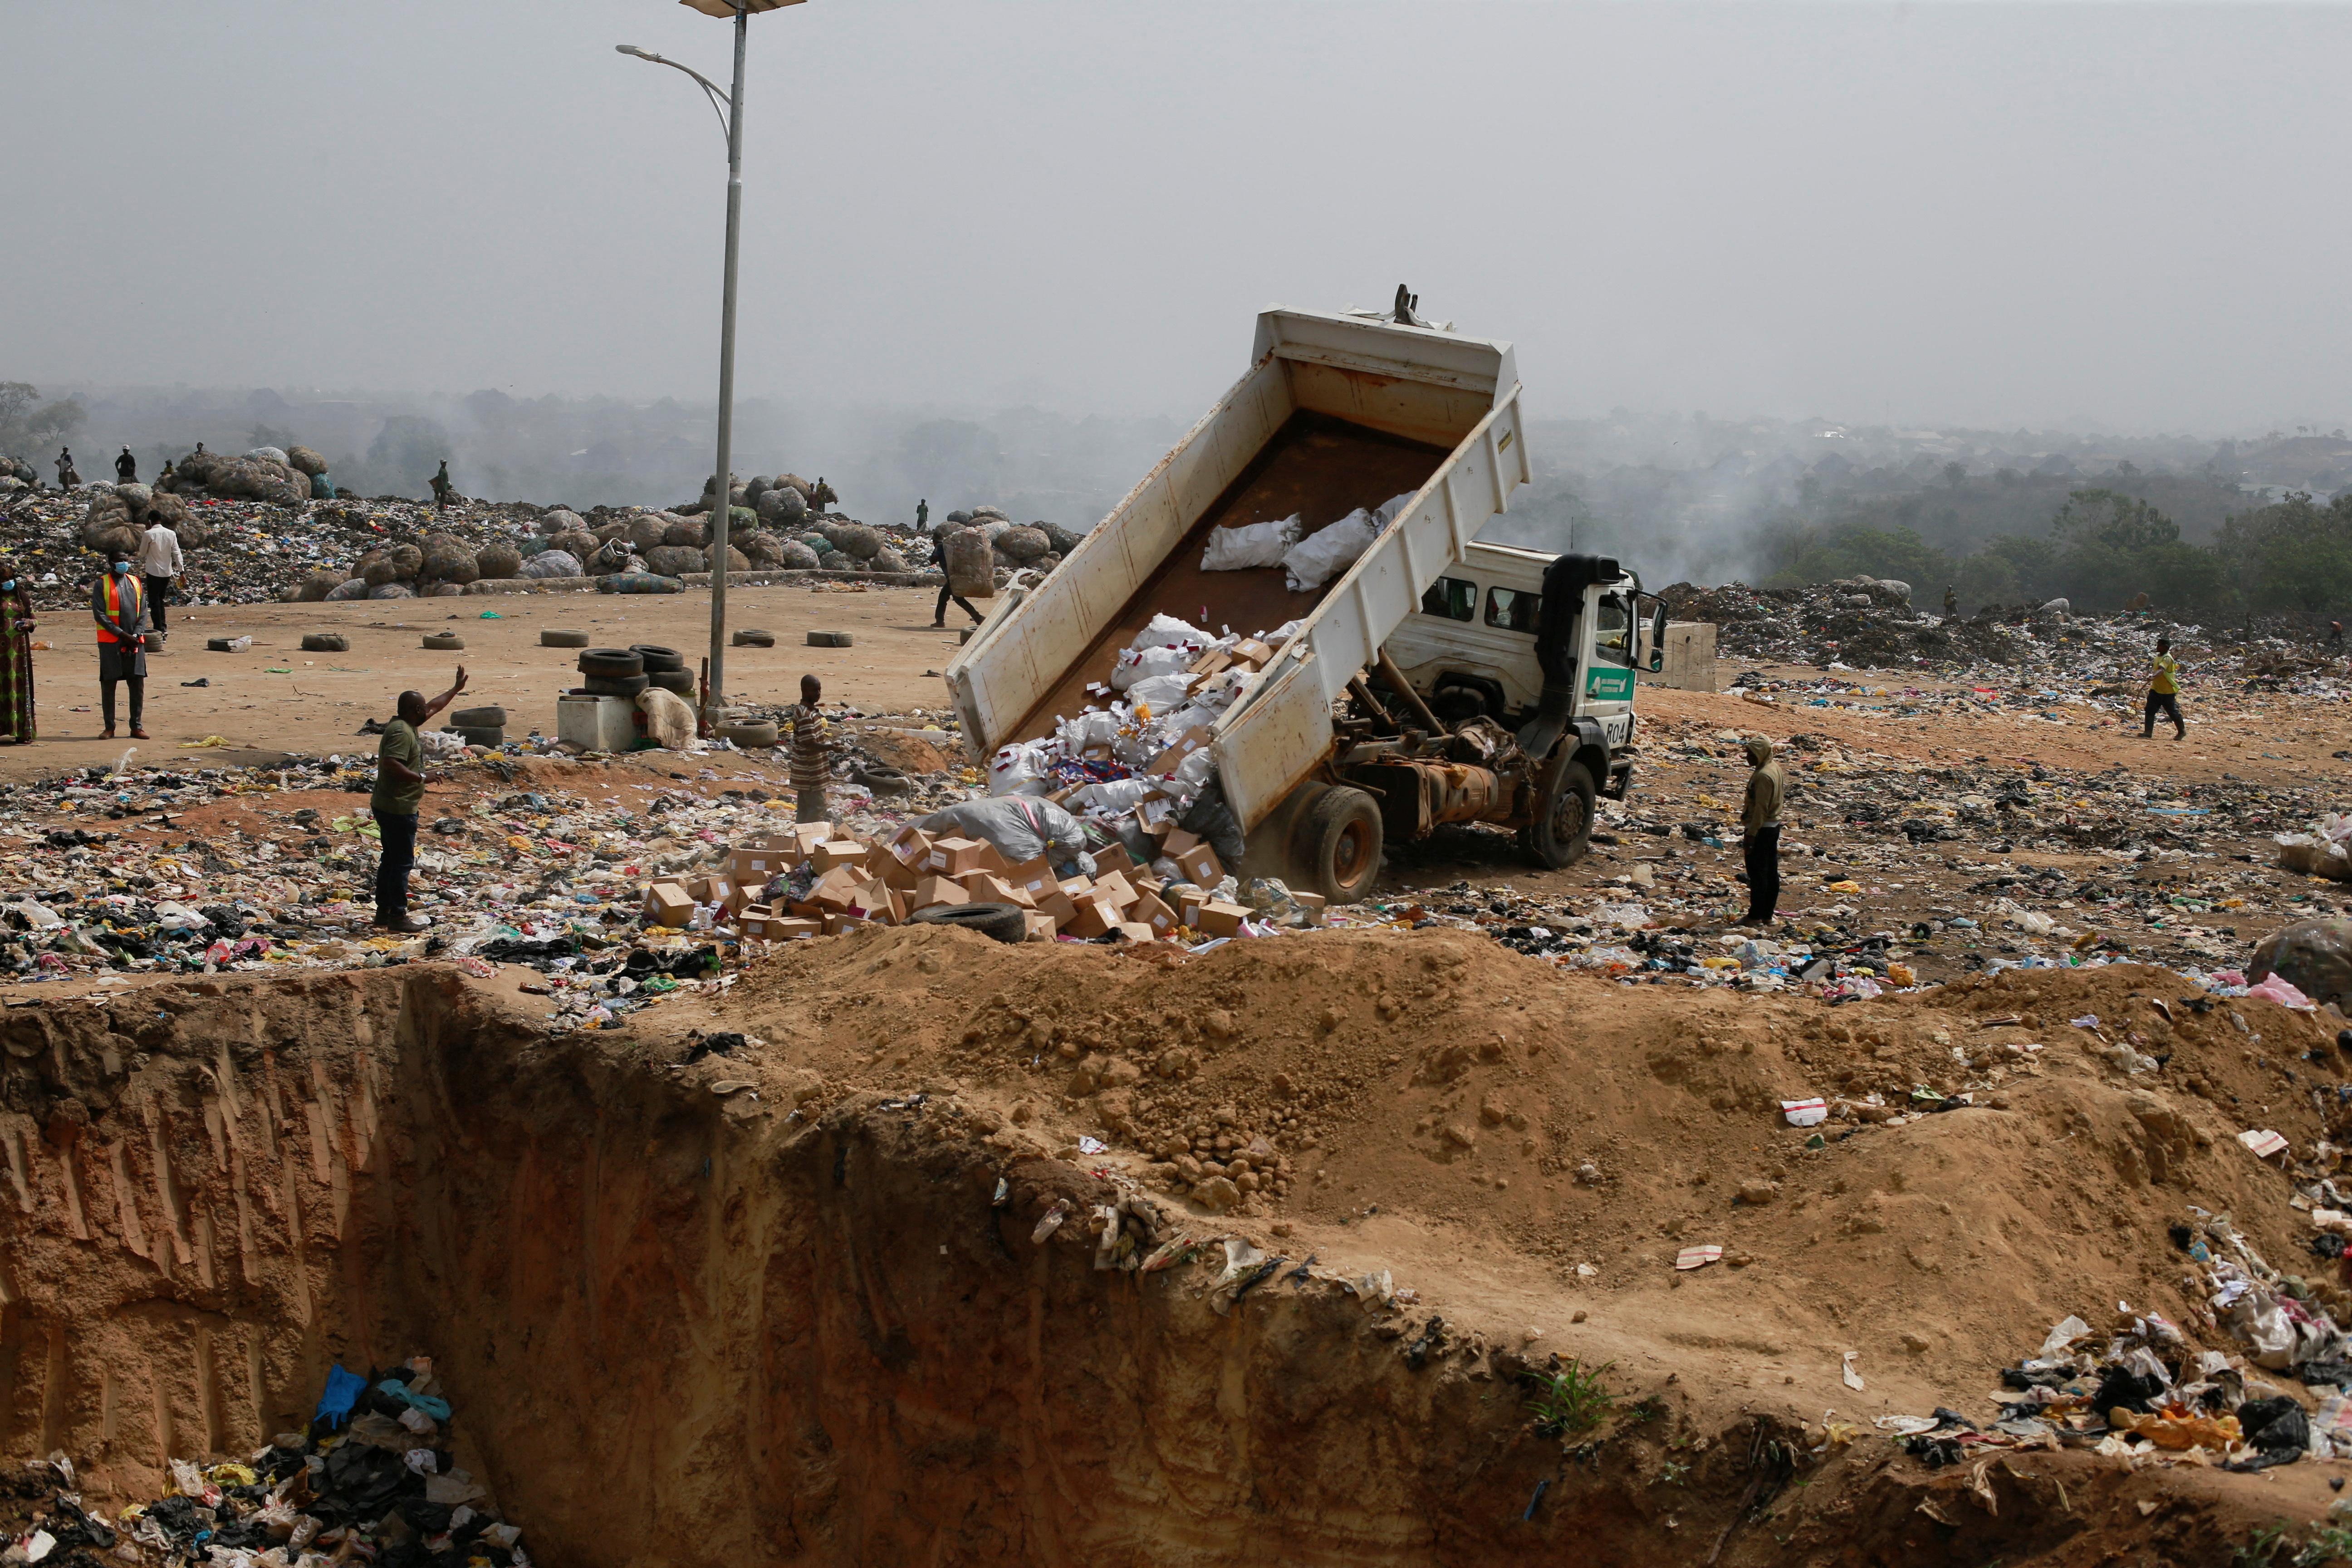 A truck trips off expired AstraZeneca COVID-19 vaccines at the Gosa dump site in Abuja